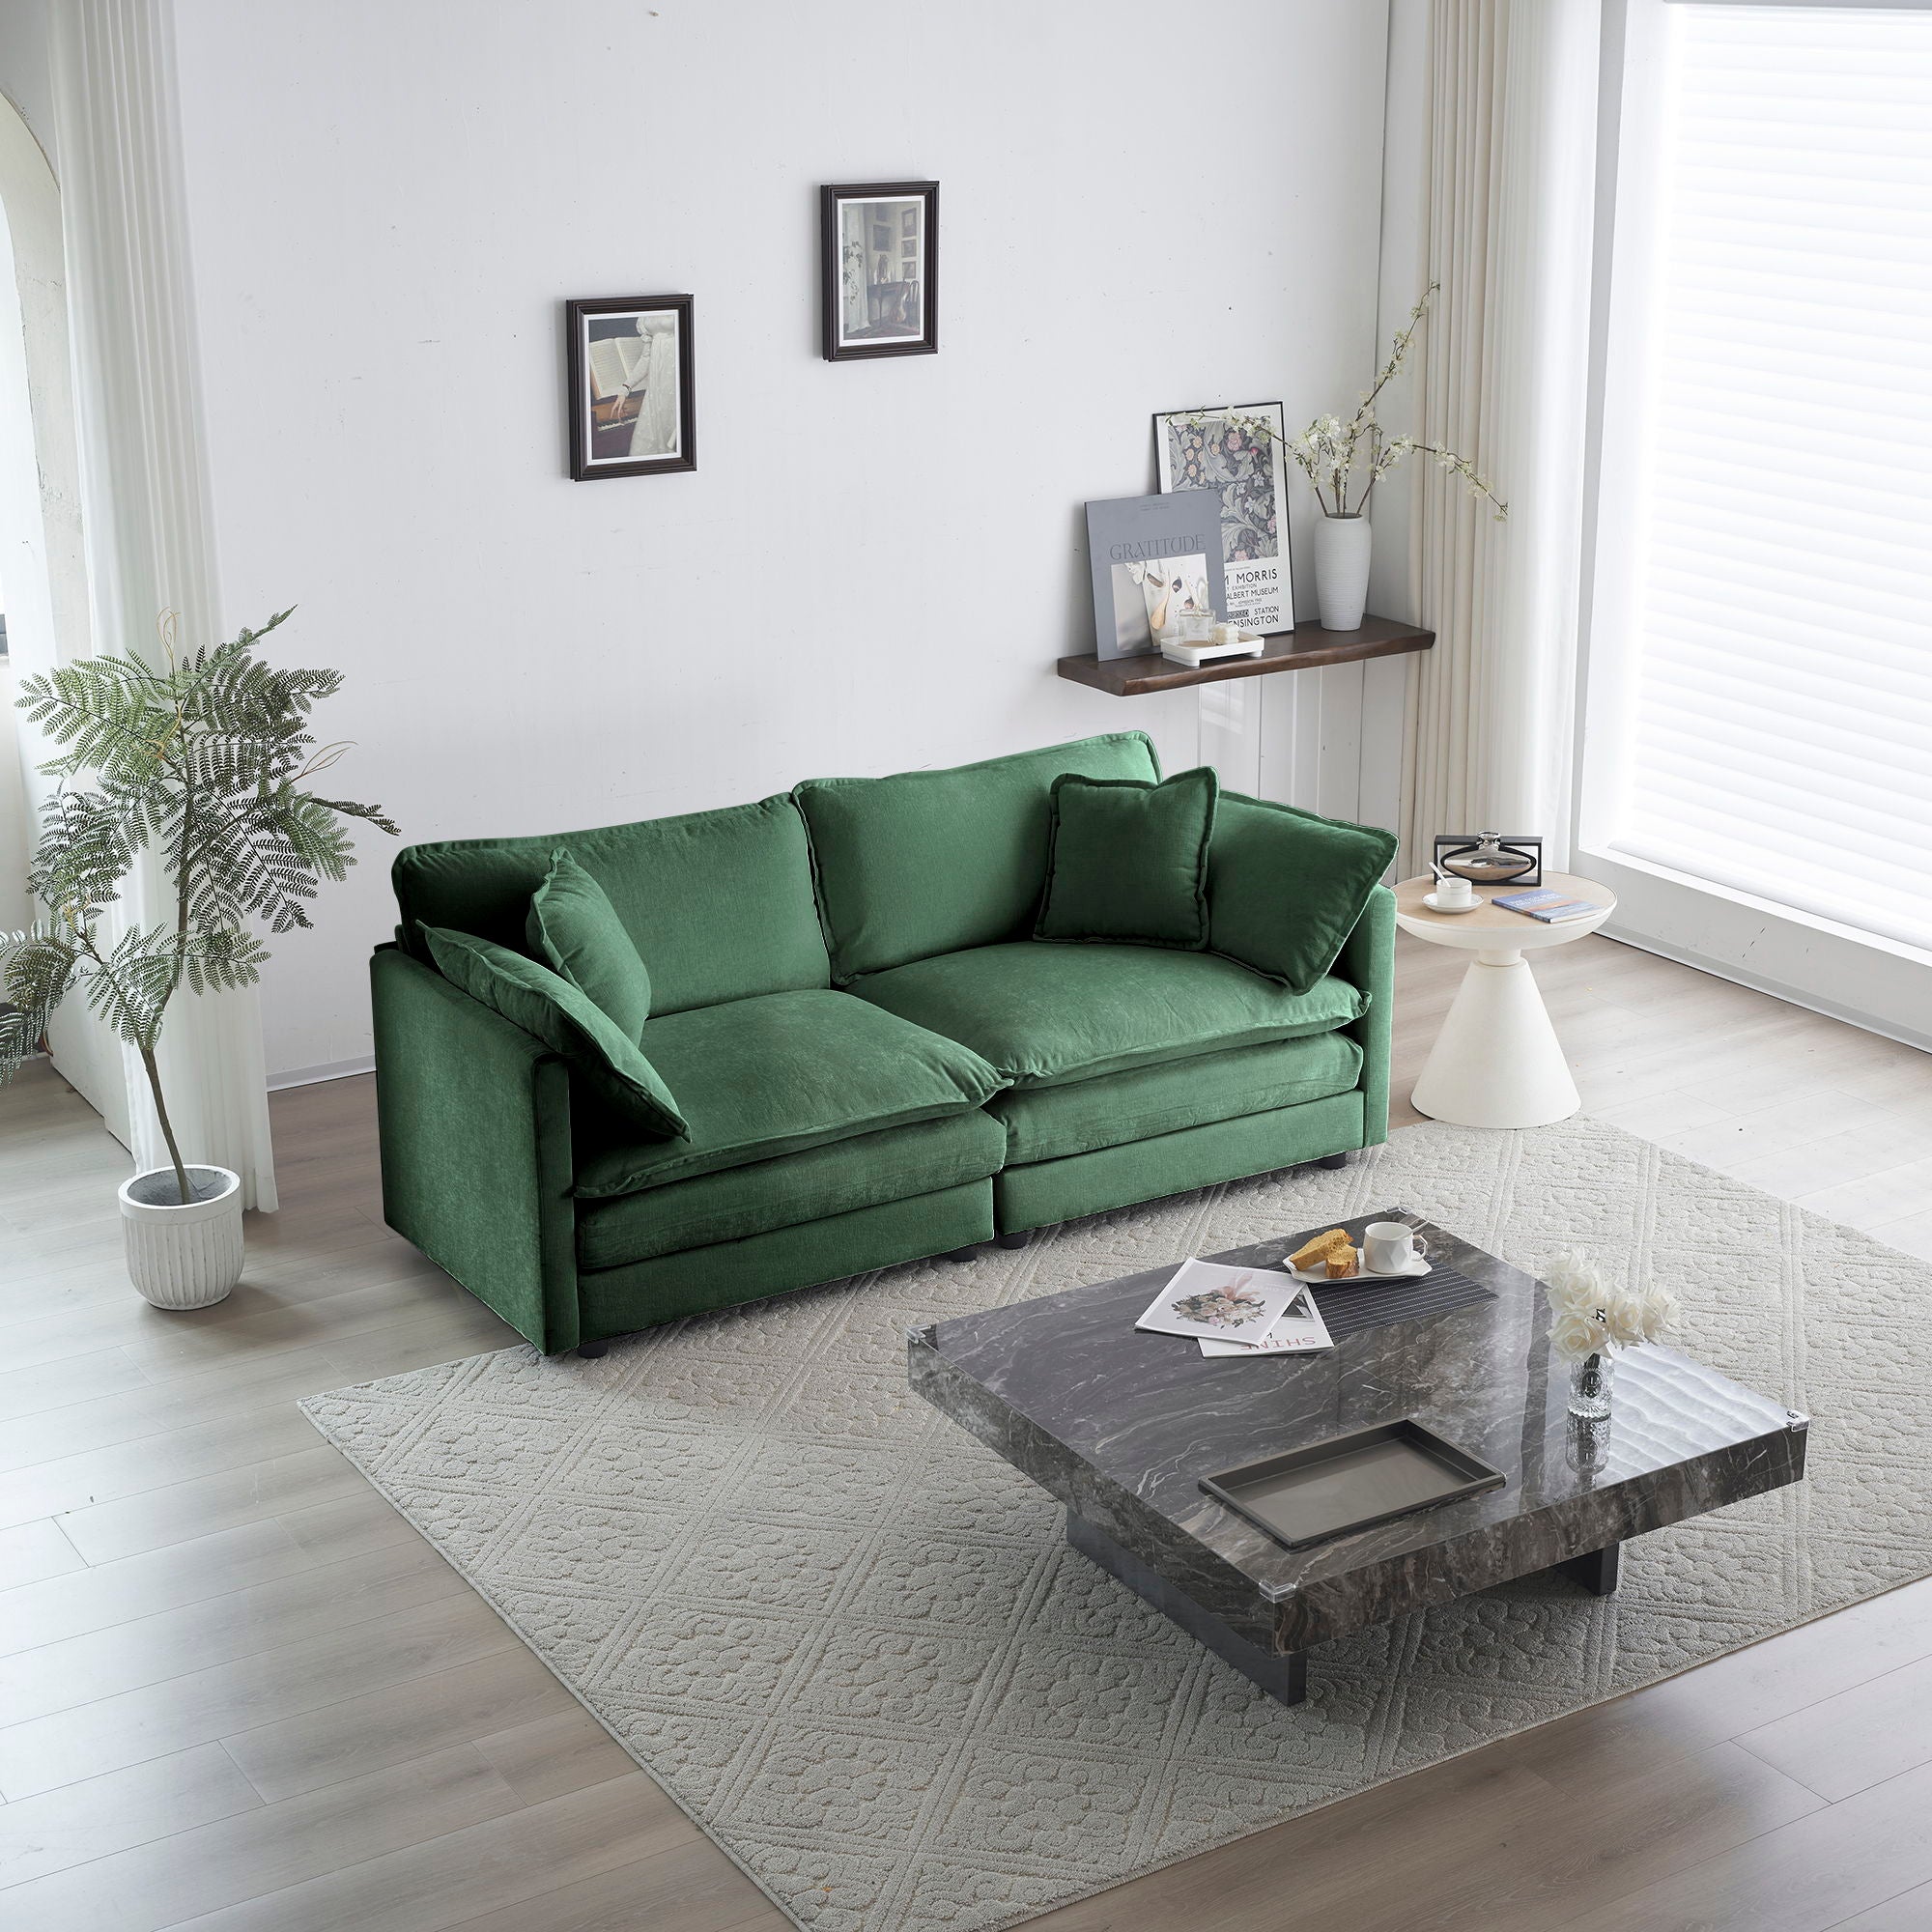 Modern Fabric Loveseat Sofa Couch For Living Room, Upholstered Large Size Deep Seat 2 - Seat Sofa With 4 Pillows, Green Chenille